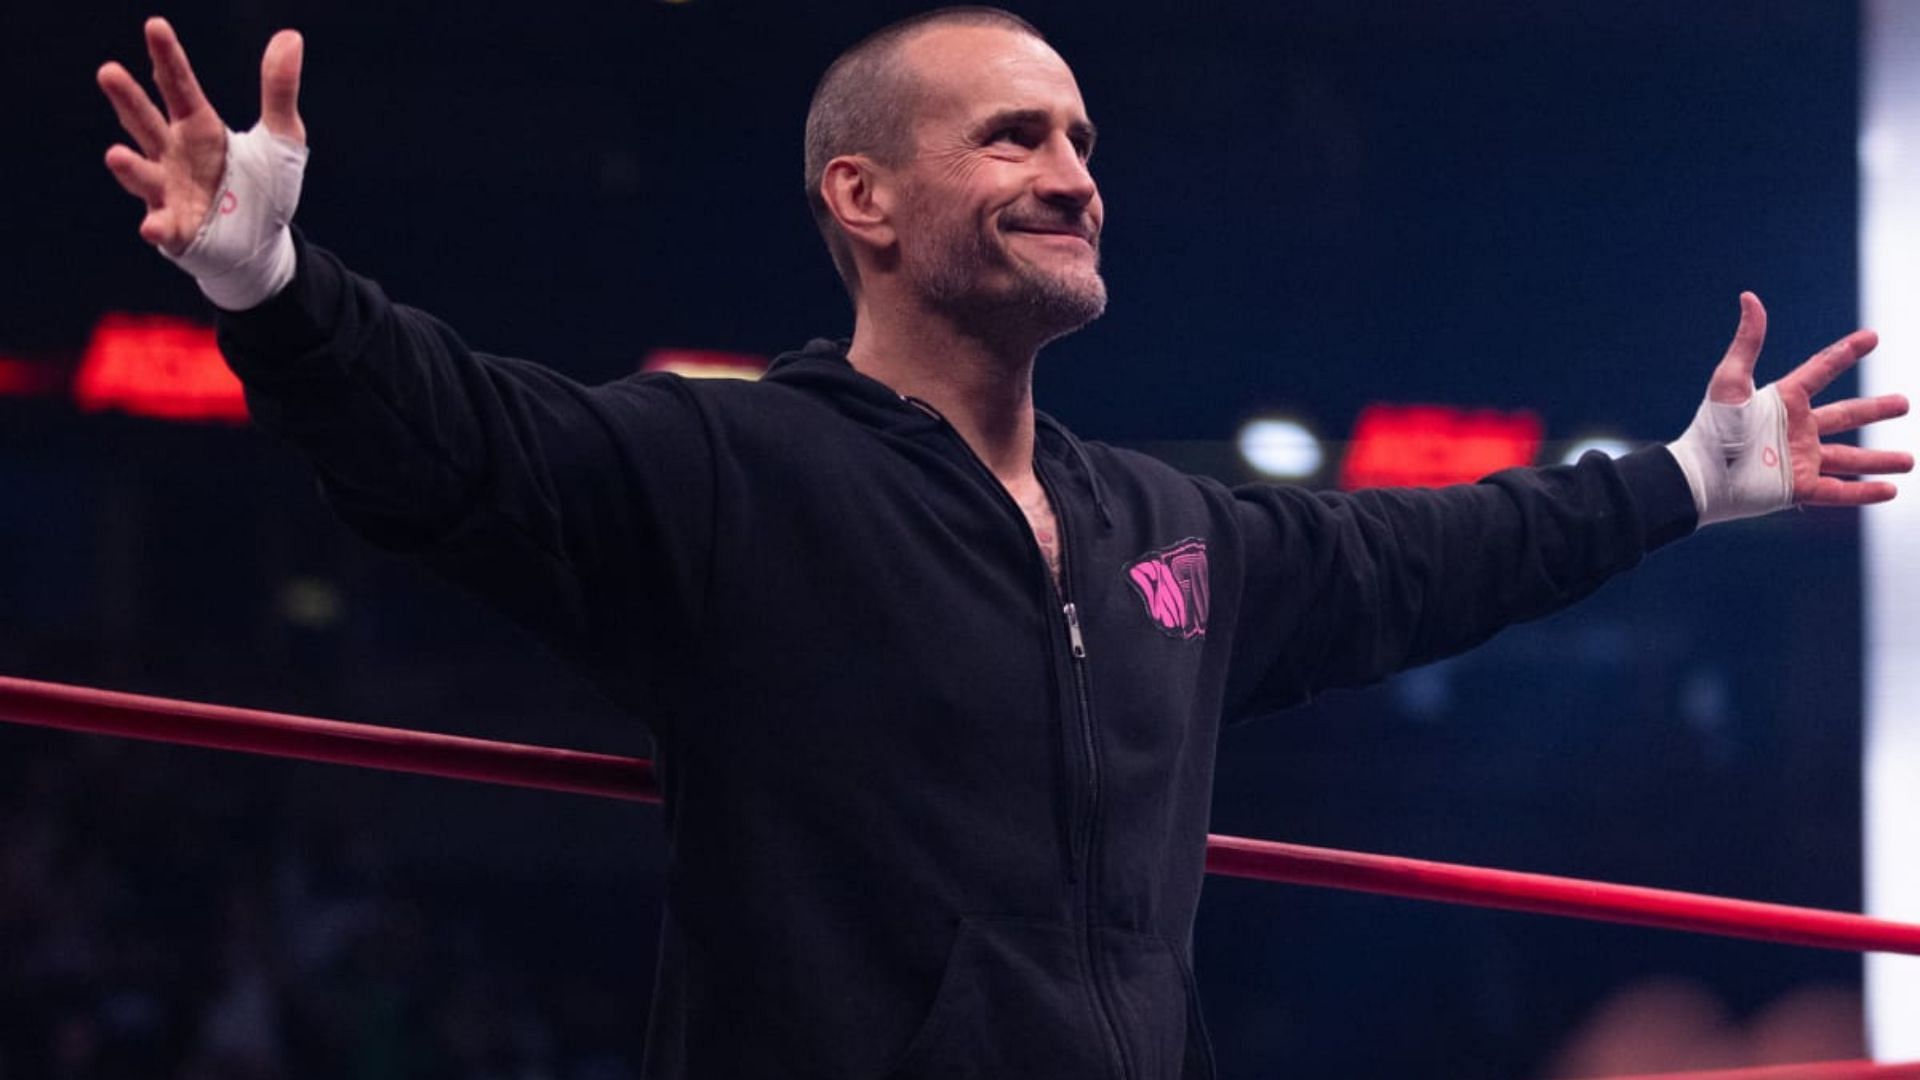 CM Punk has been speculated to make his return tomorrow at Survivor Series